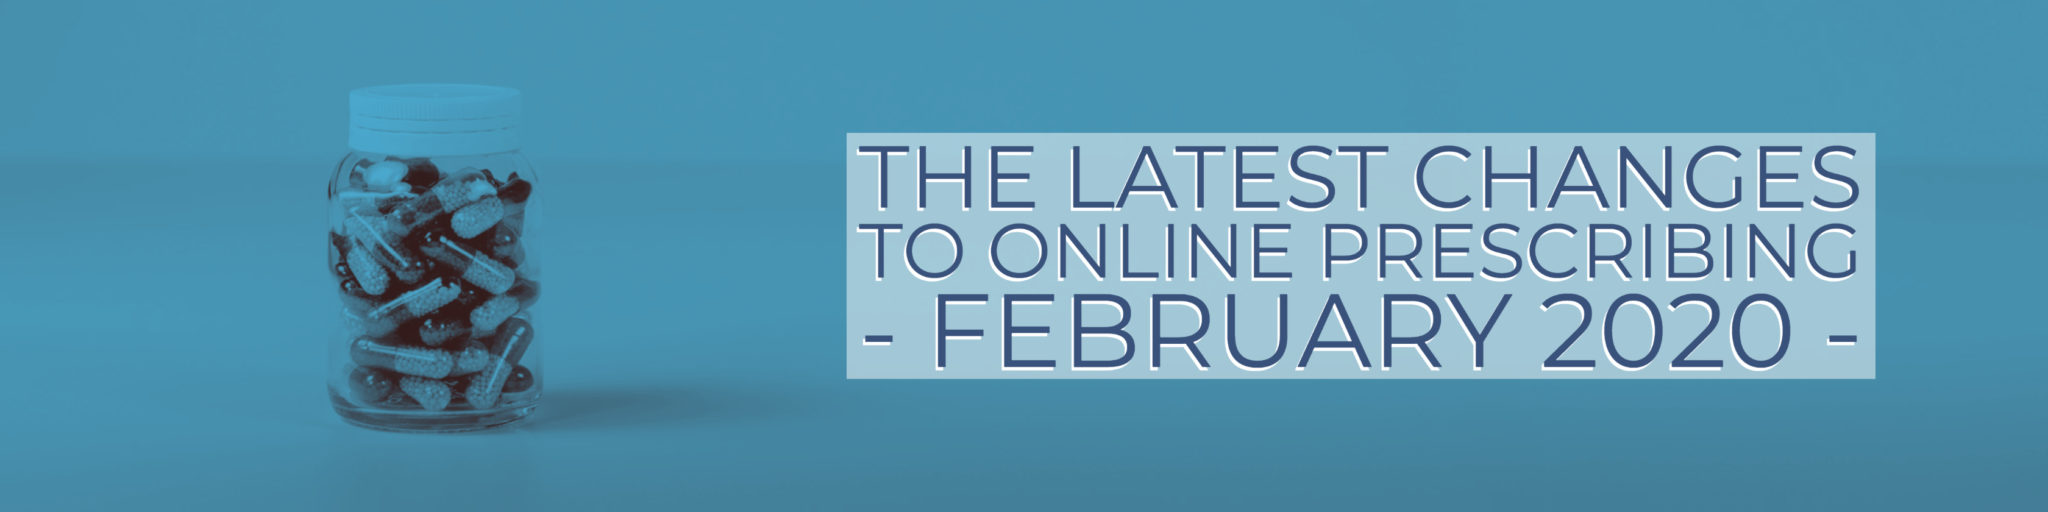 The Latest Changes To Online Prescribing February 2020 Doctor 4 U